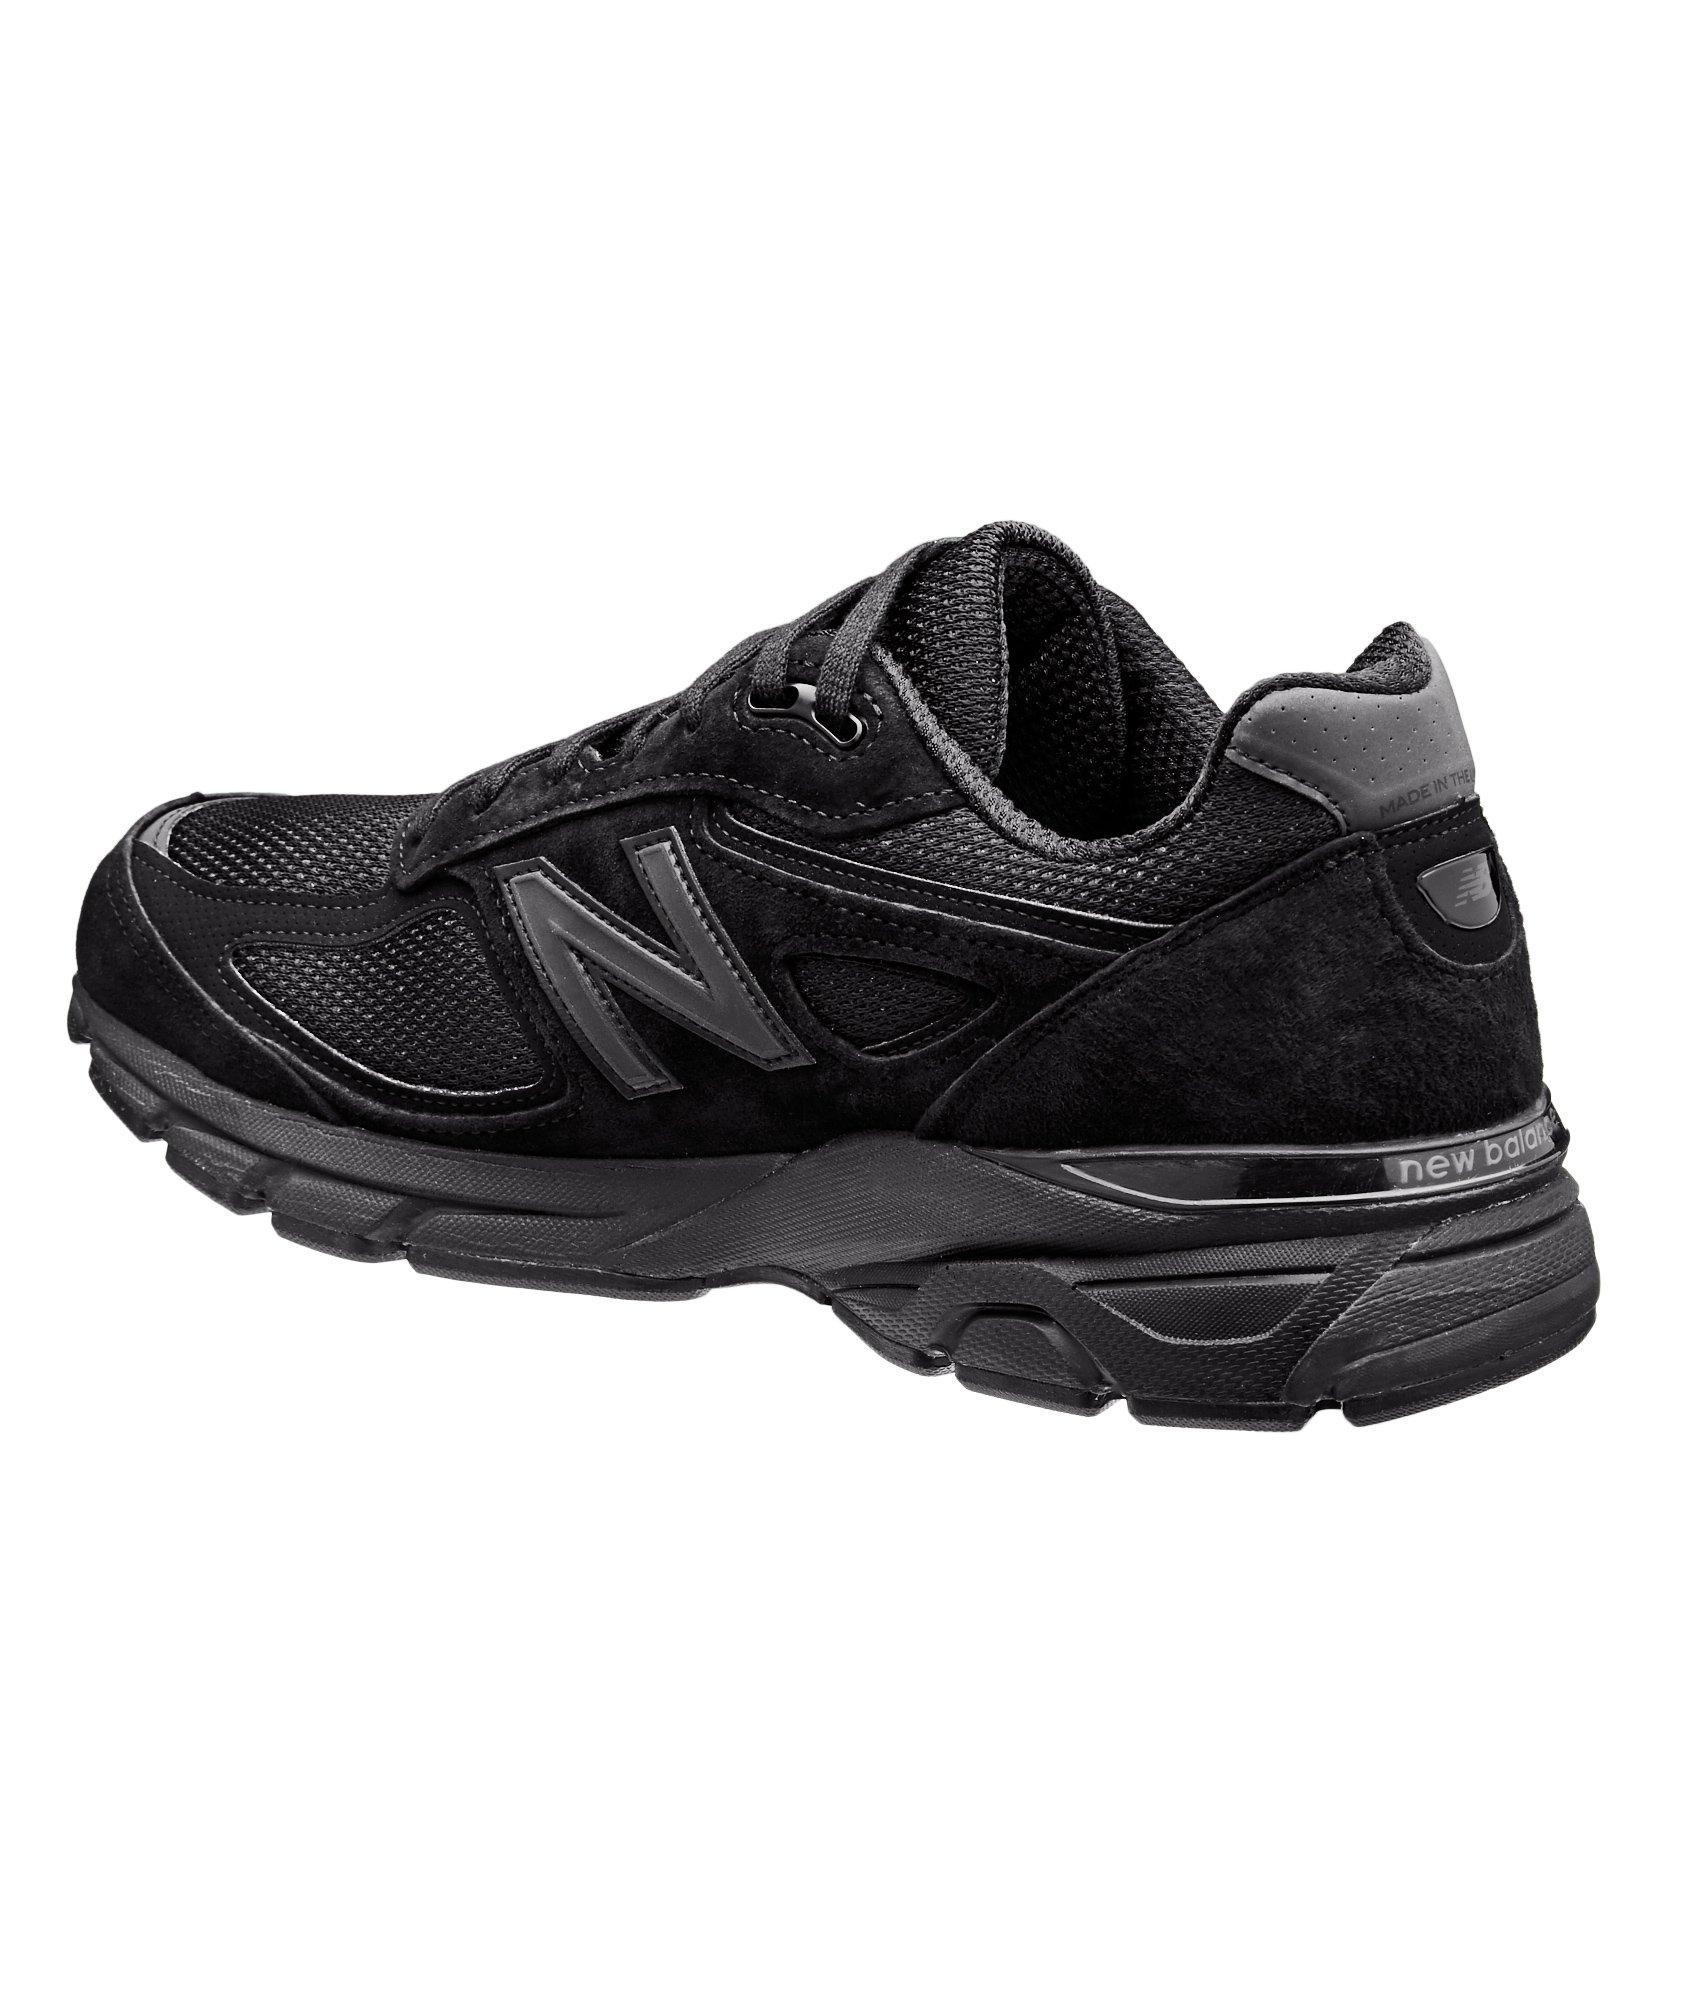 990v4 Sneakers image 1